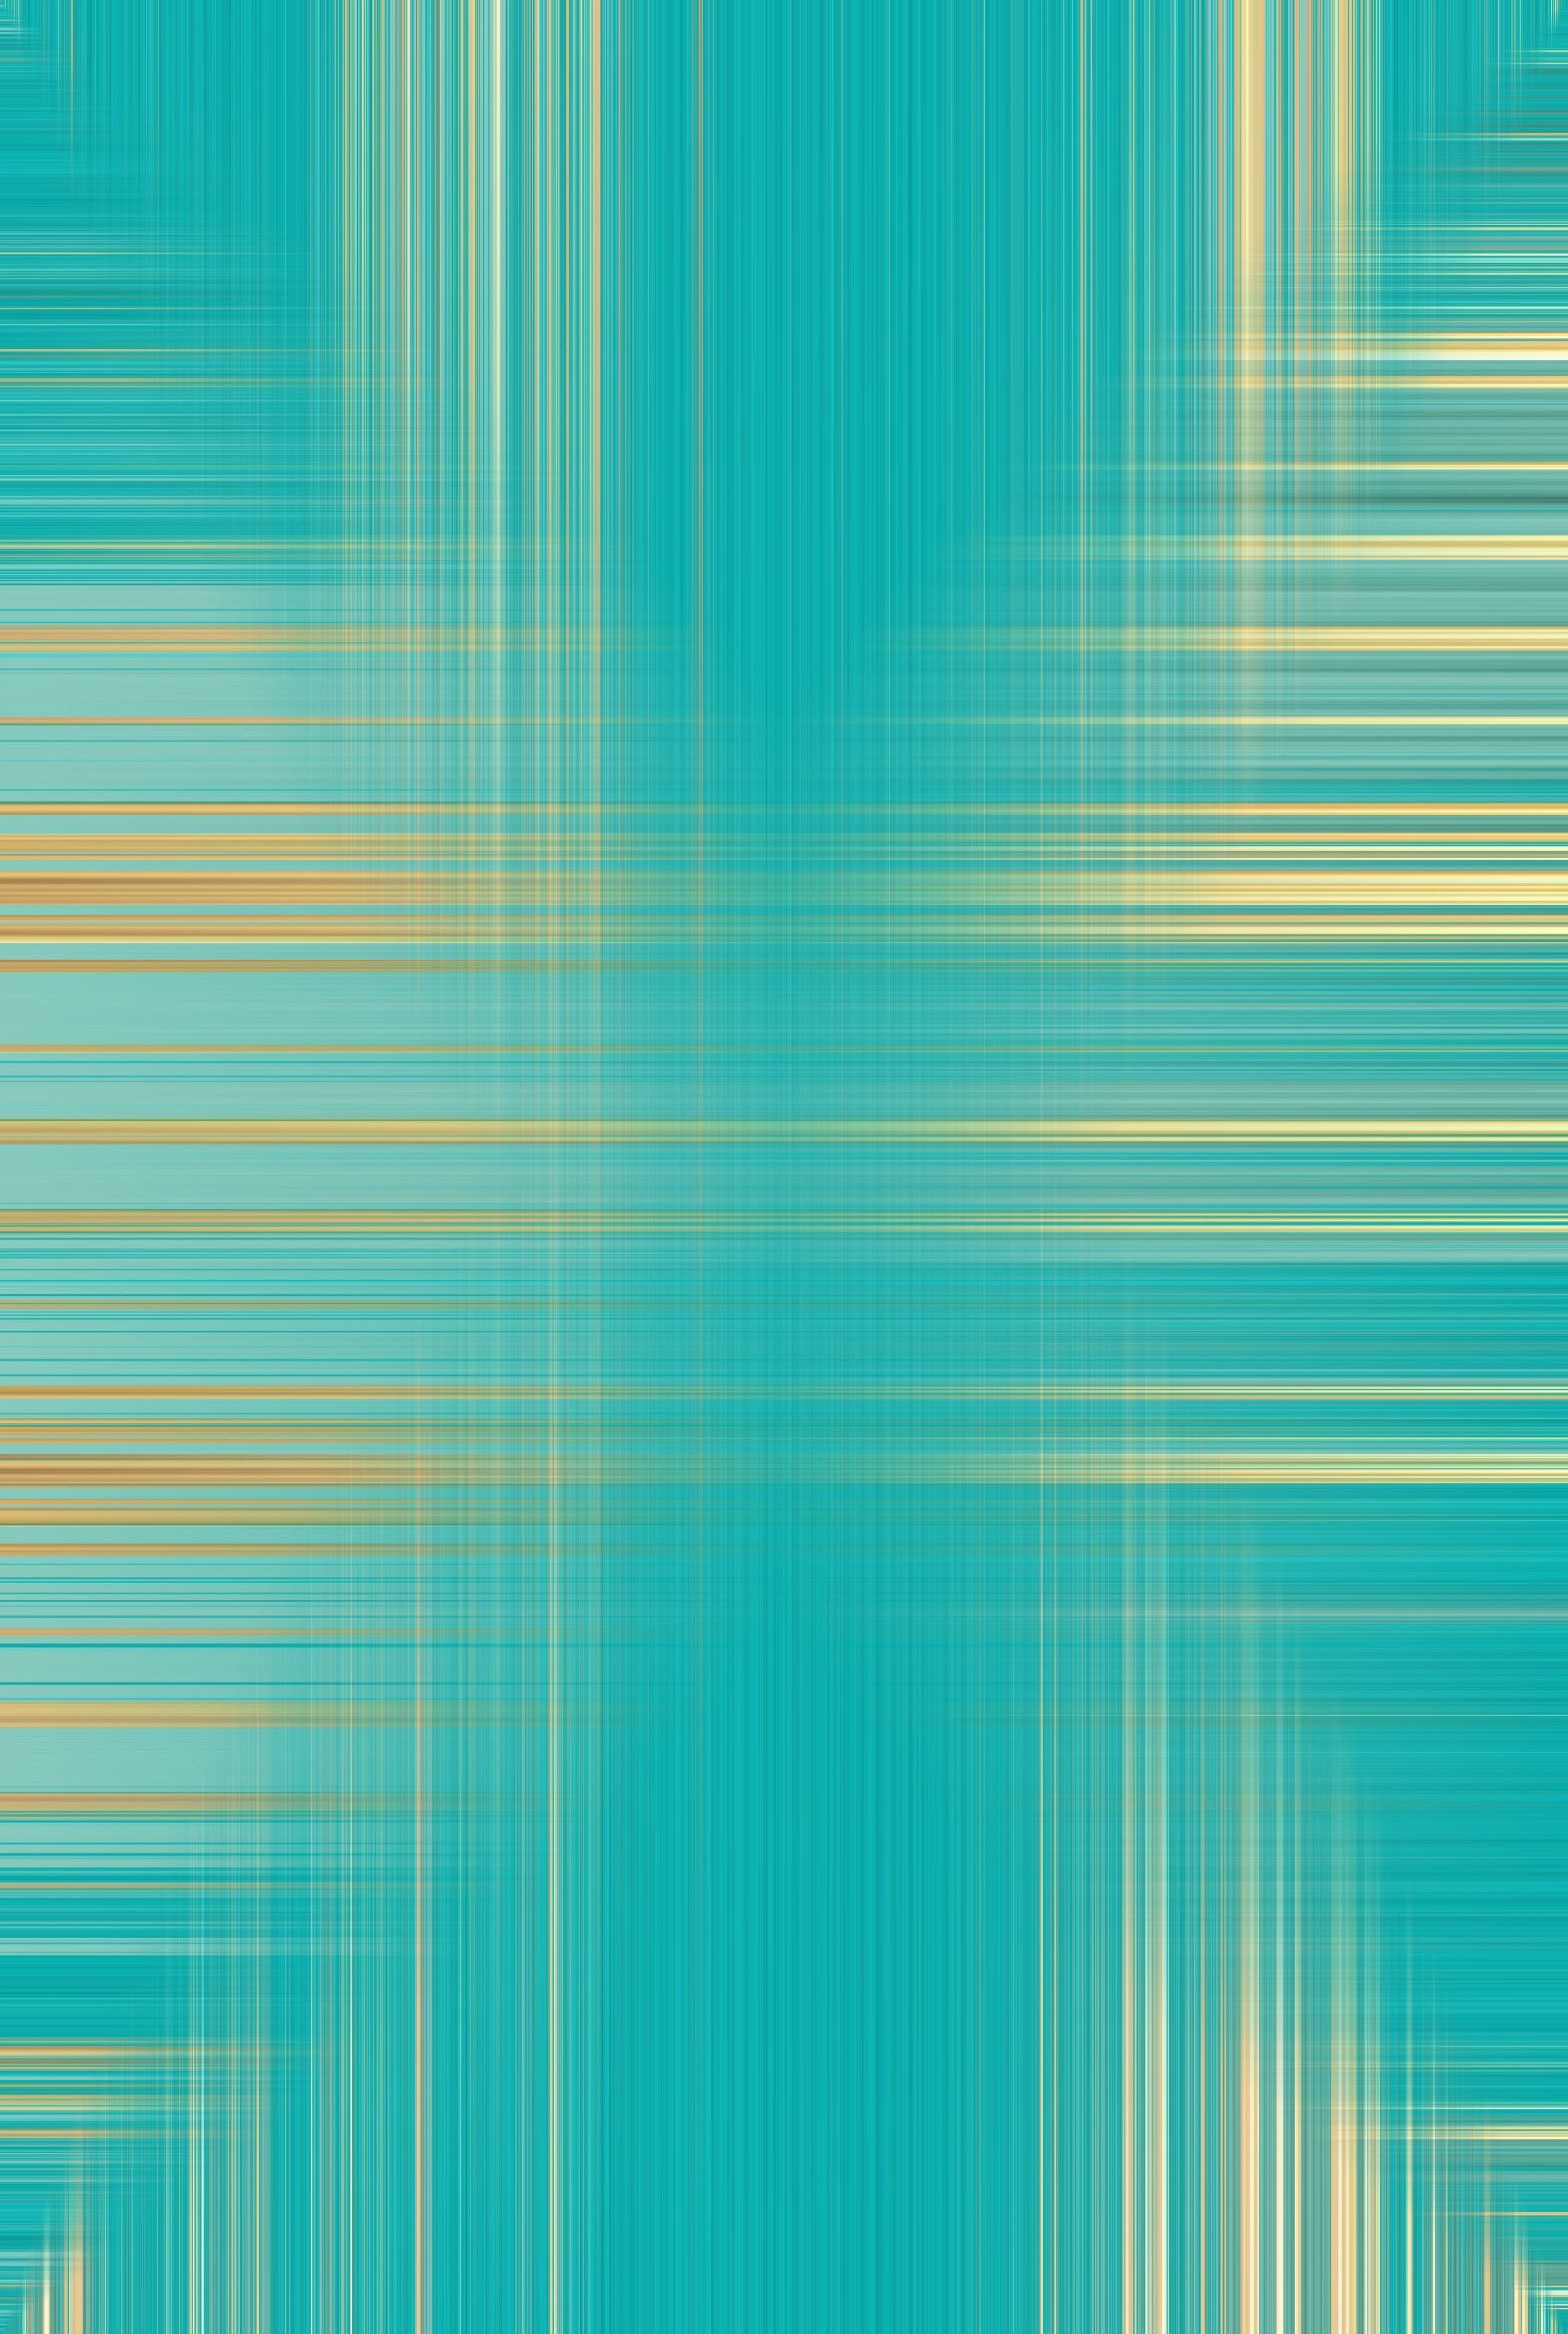 lines, graphics, textures, texture, stripes, turquoise, streaks wallpaper for mobile